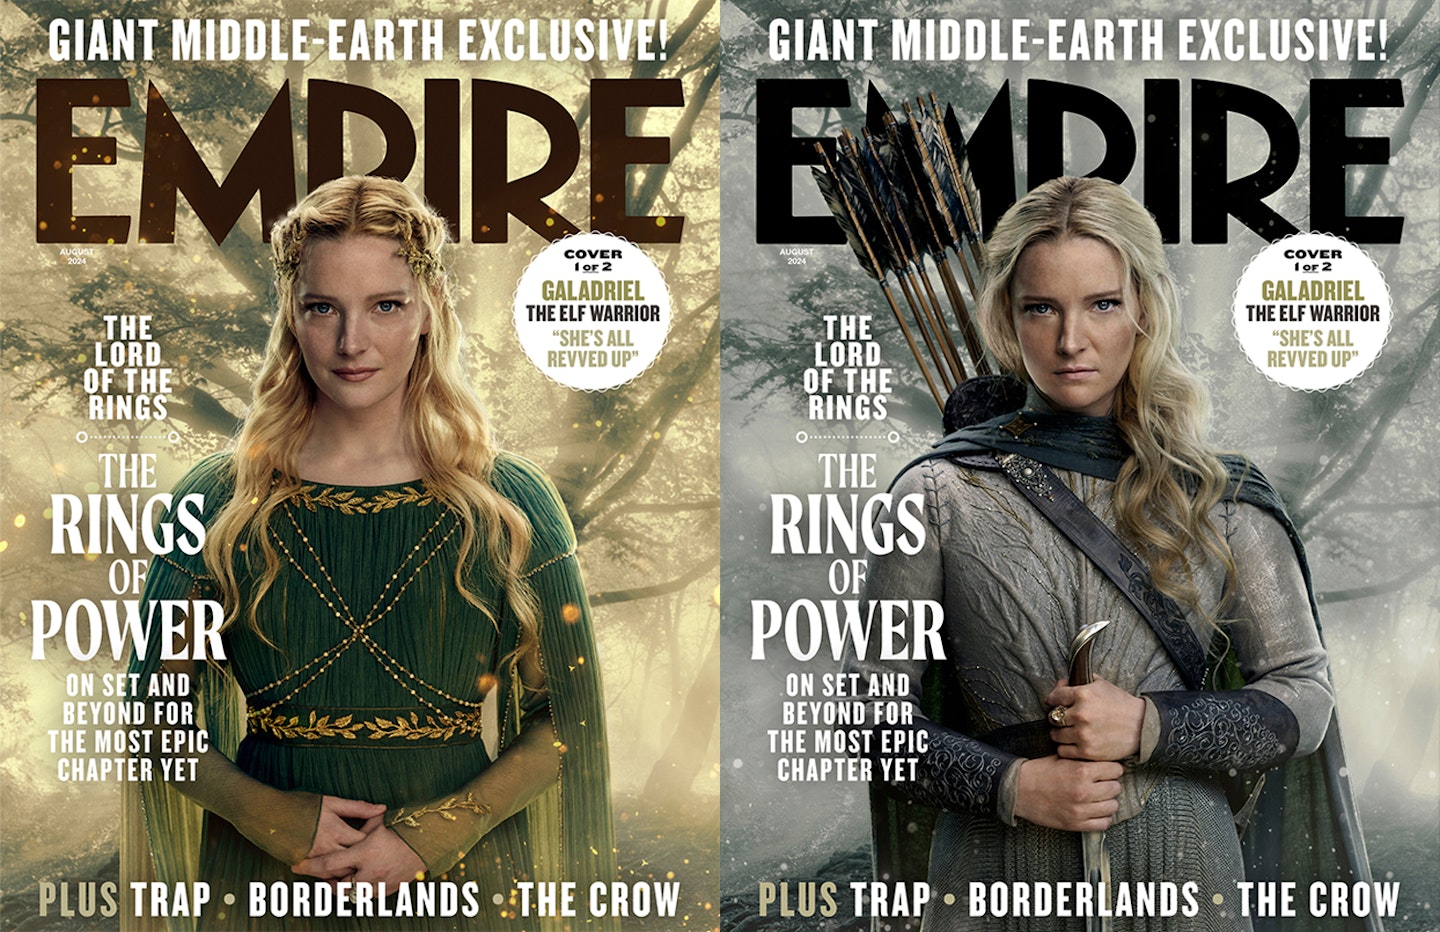 The Lord Of The Rings: The Rings Of Power Season 2 – Empire Galadriel covers